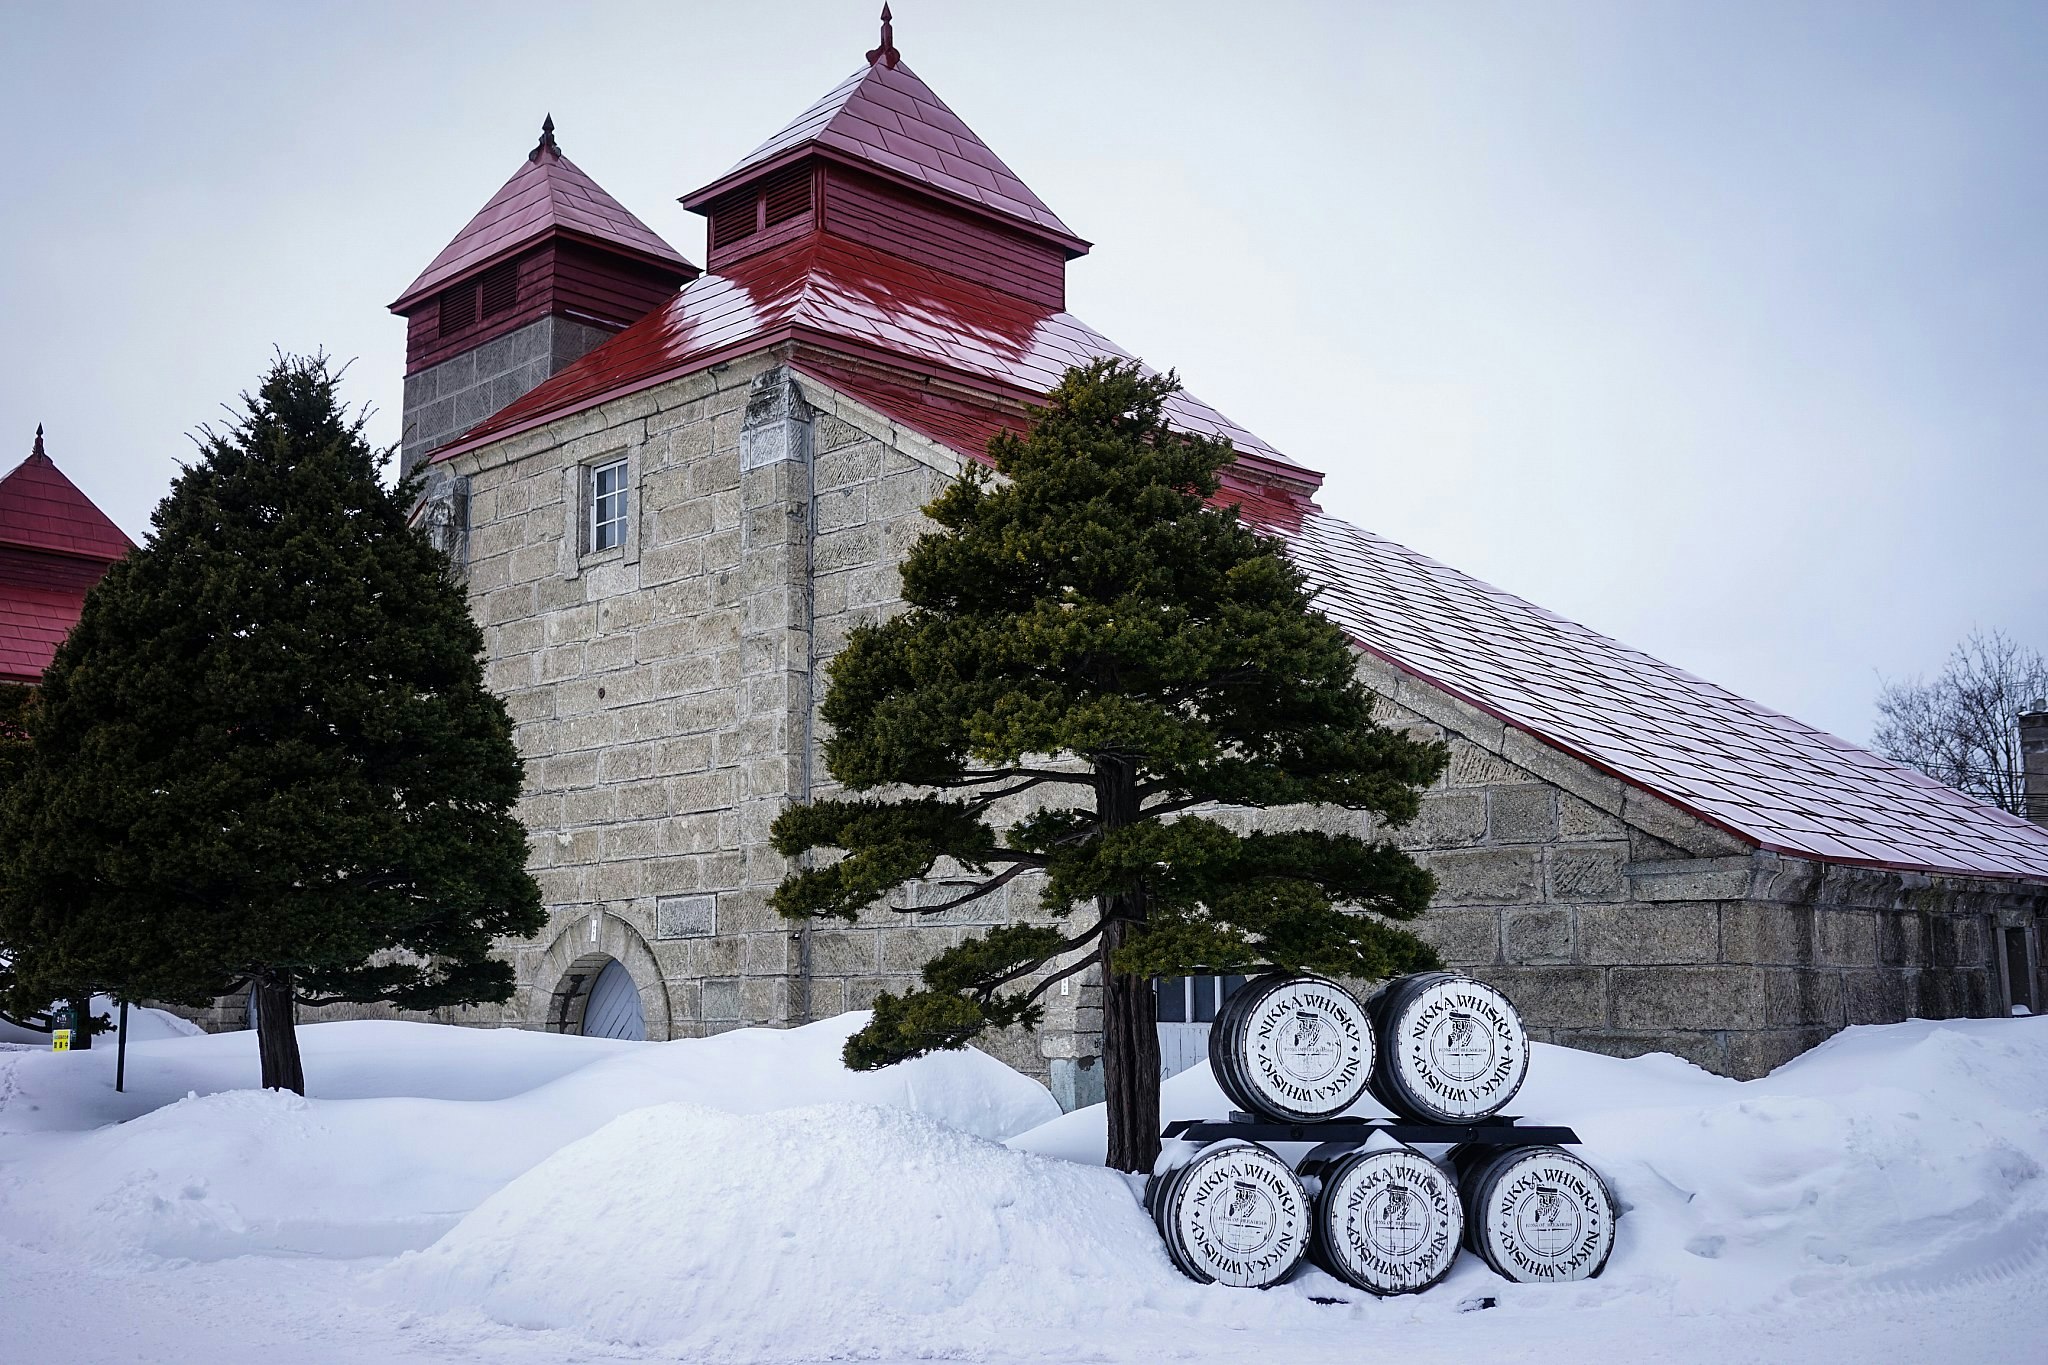 The Nikka Distillery at Yoichi in Hokkaido; we see a grey stone building with red towers, surrounded by snow with pine trees in front of it.